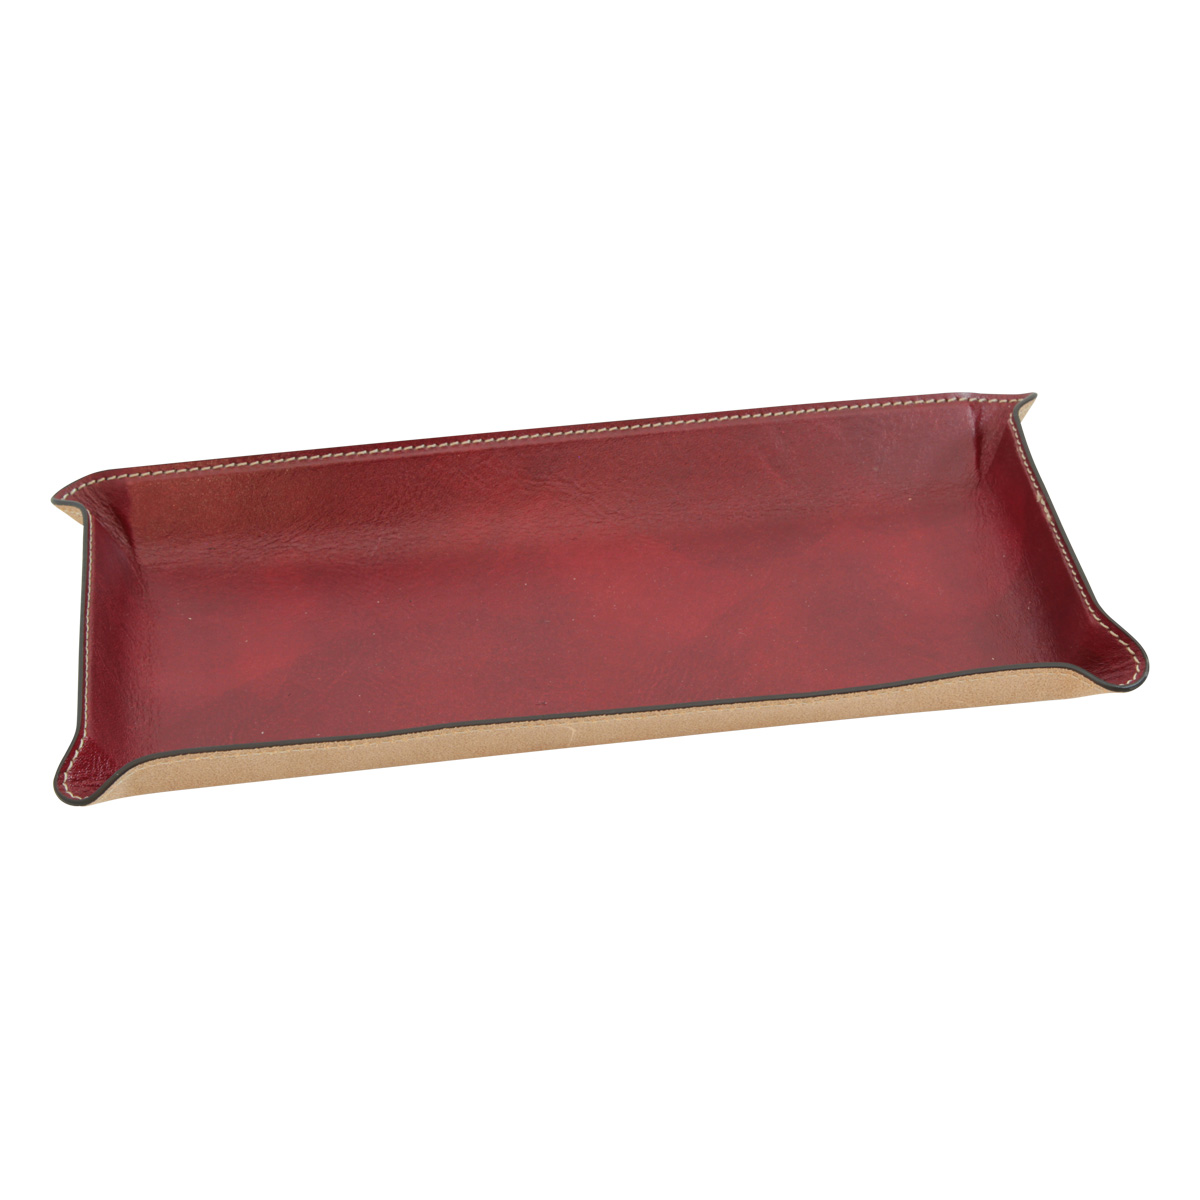 Leather desk tray - red|762089RO|Old Angler Firenze